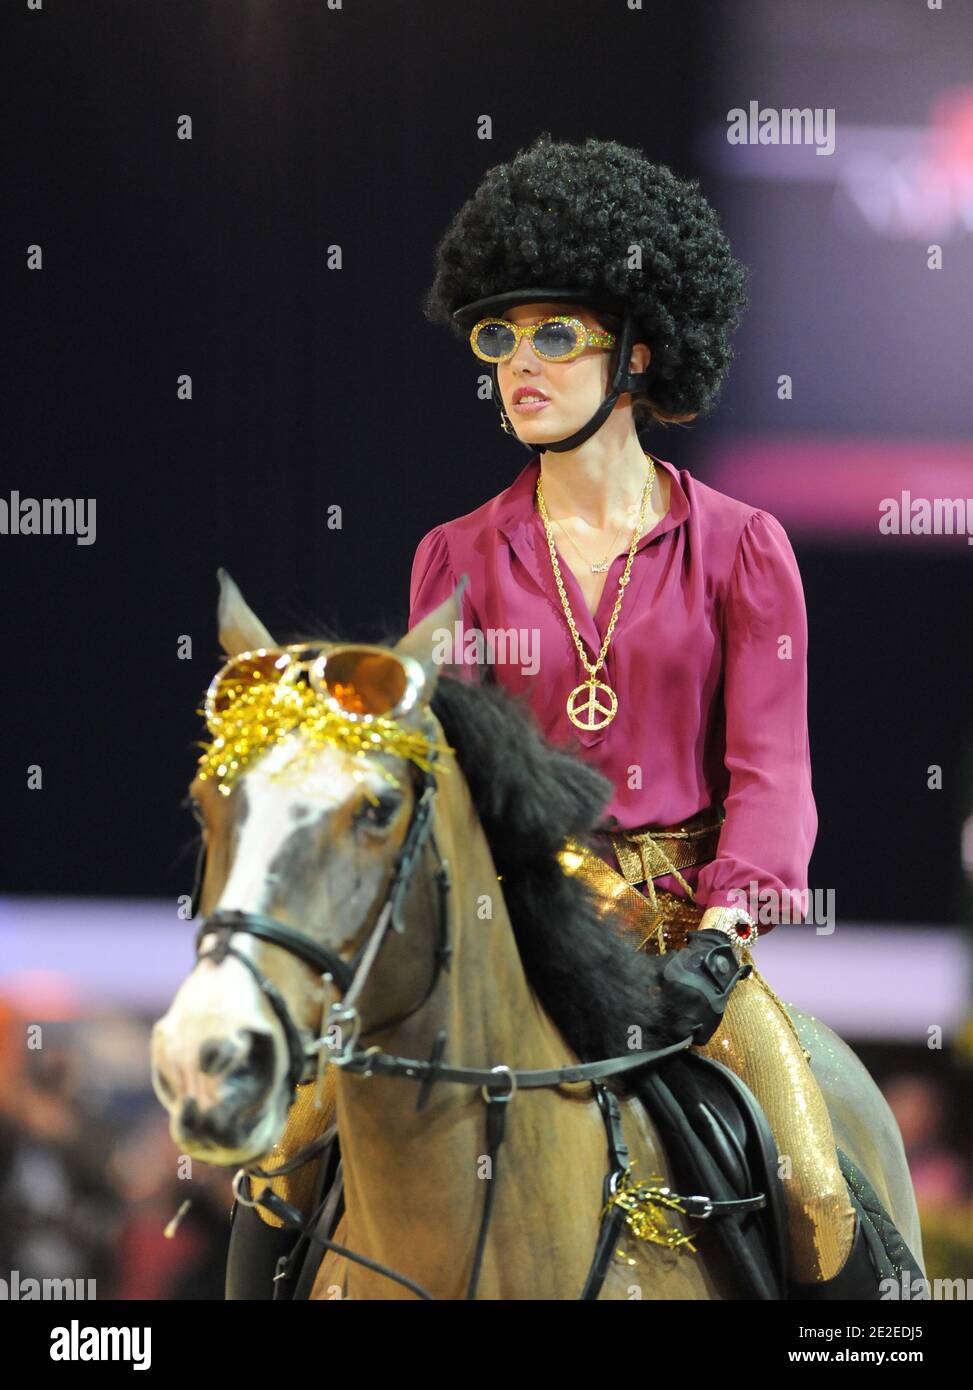 Charlotte Casiraghi participates at the Amade price during the Gucci Masters International Jumping Competition in Villepinte, North of Paris, France on December 3, 2011. Photo by ABACAPRESS.COM Stock Photo